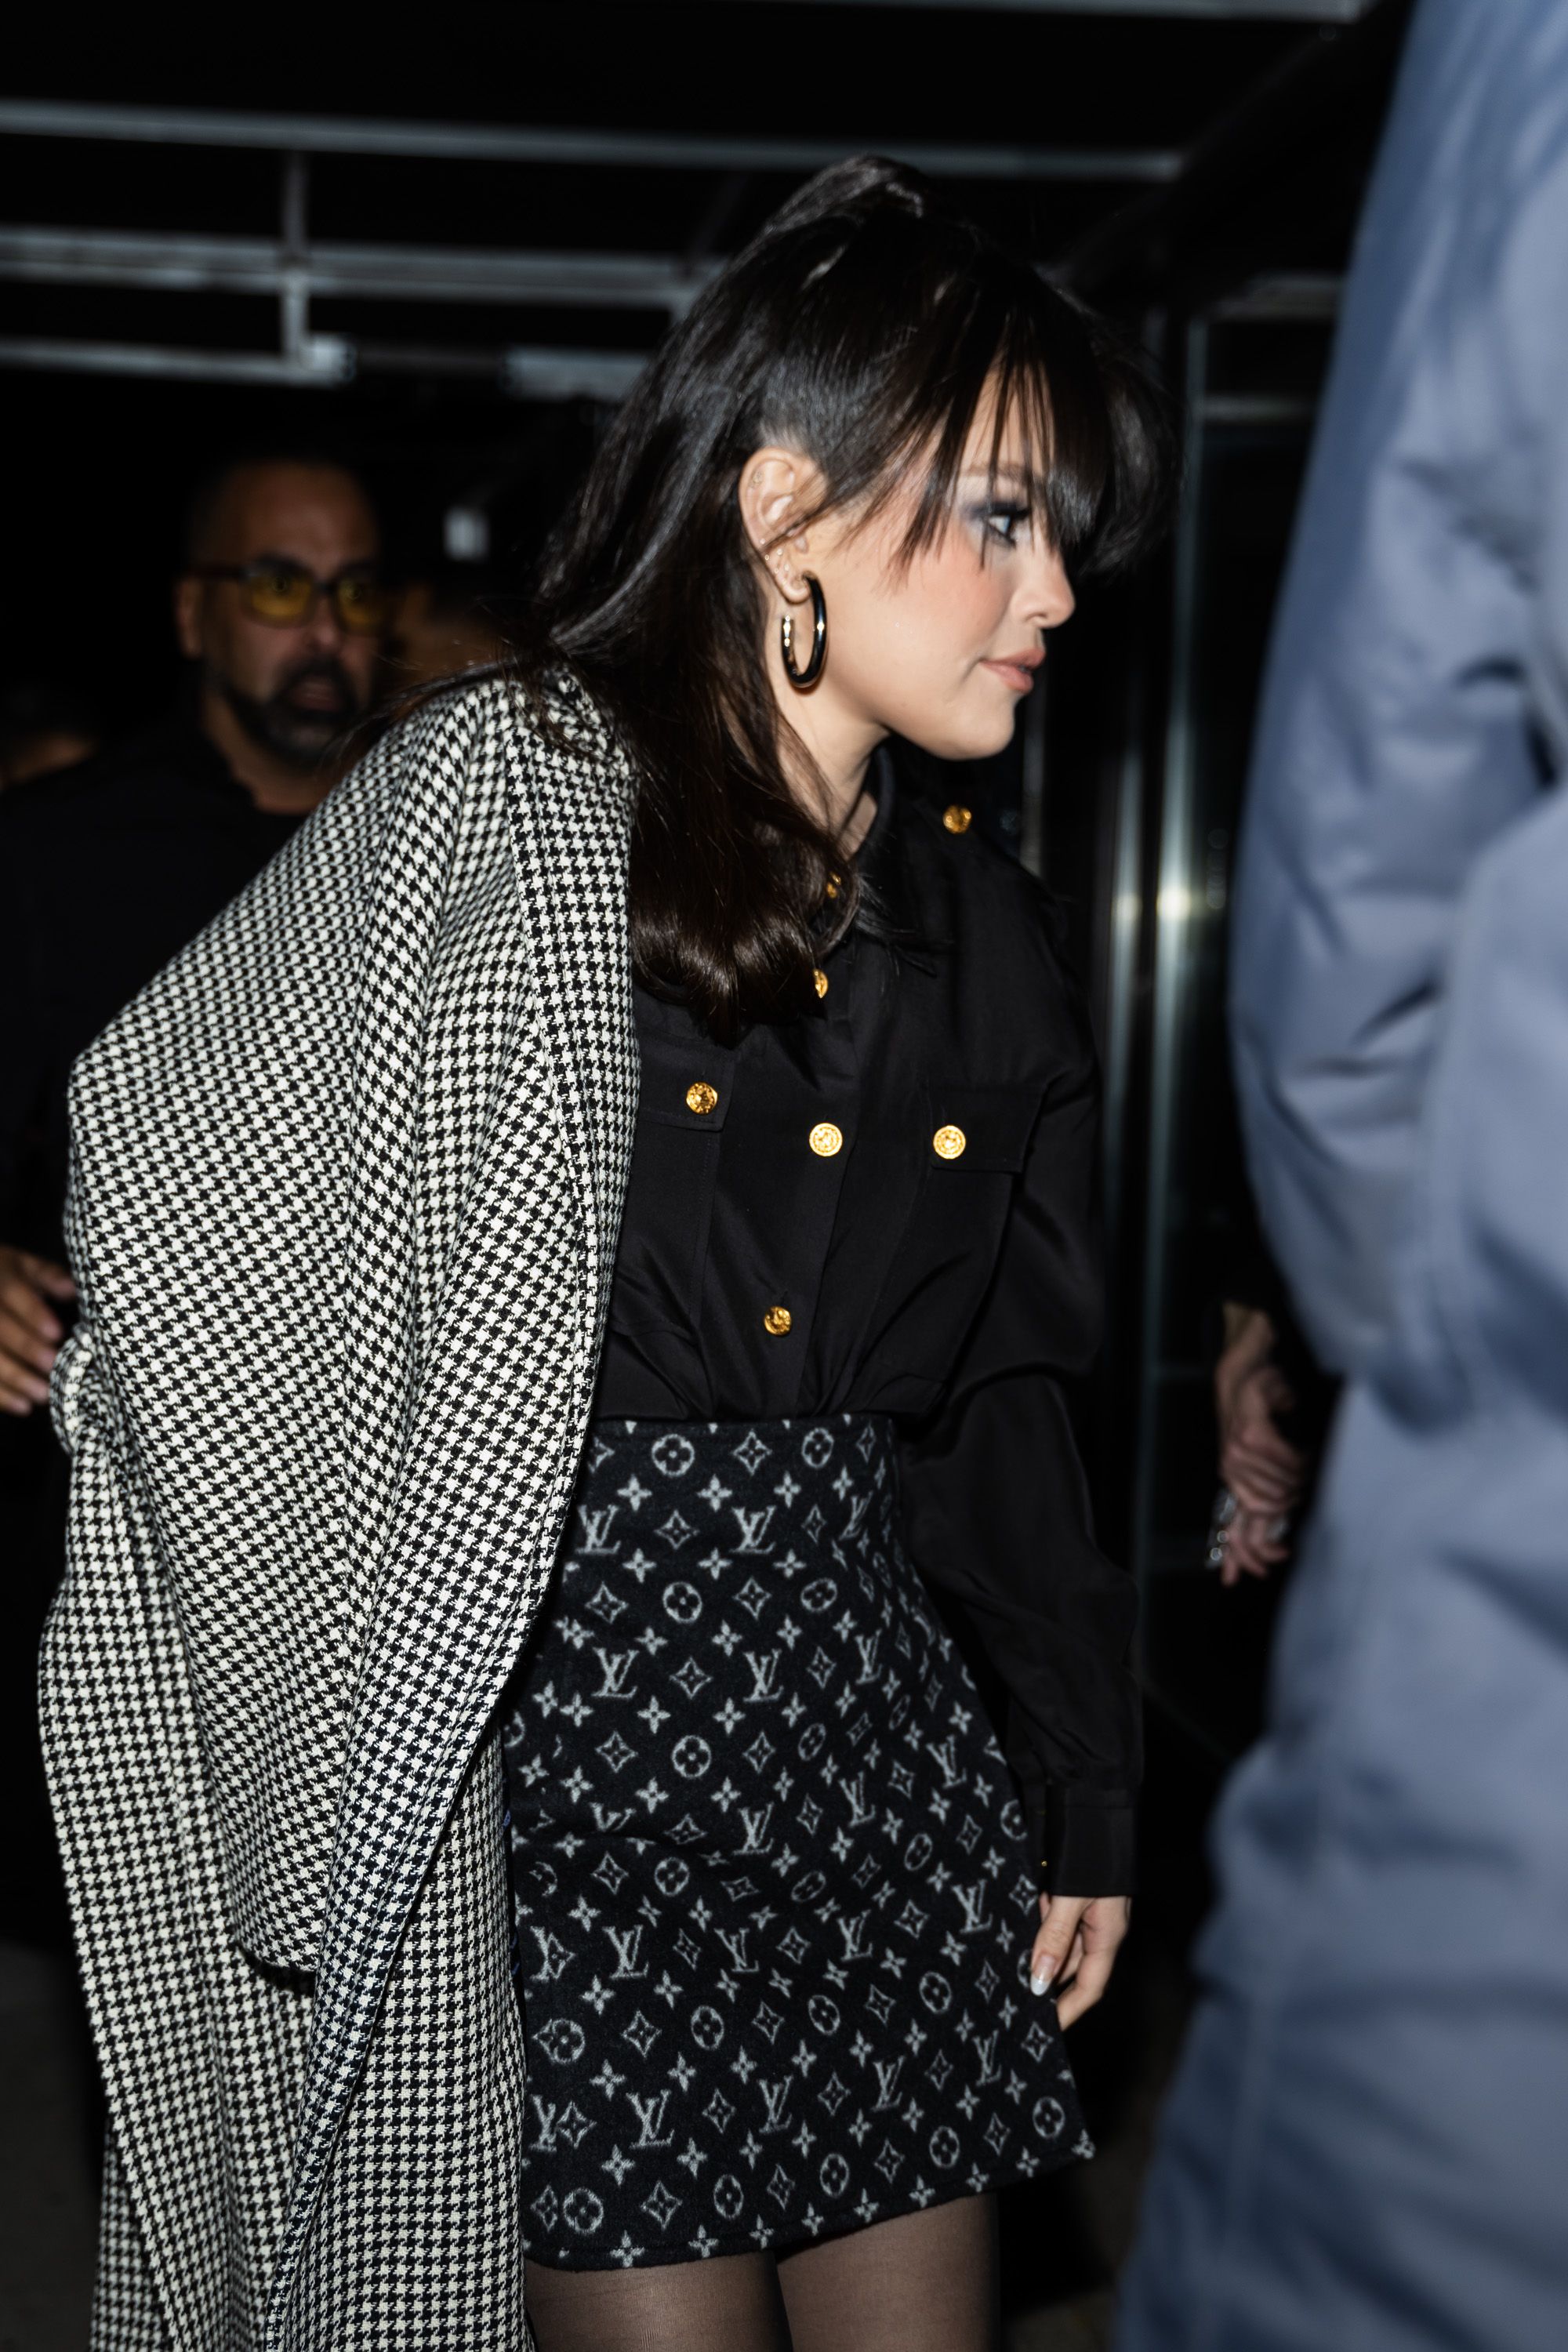 Selena Gomez Paired a Chic Louis Vuitton Miniskirt With a Houndstooth Coat  in NYC